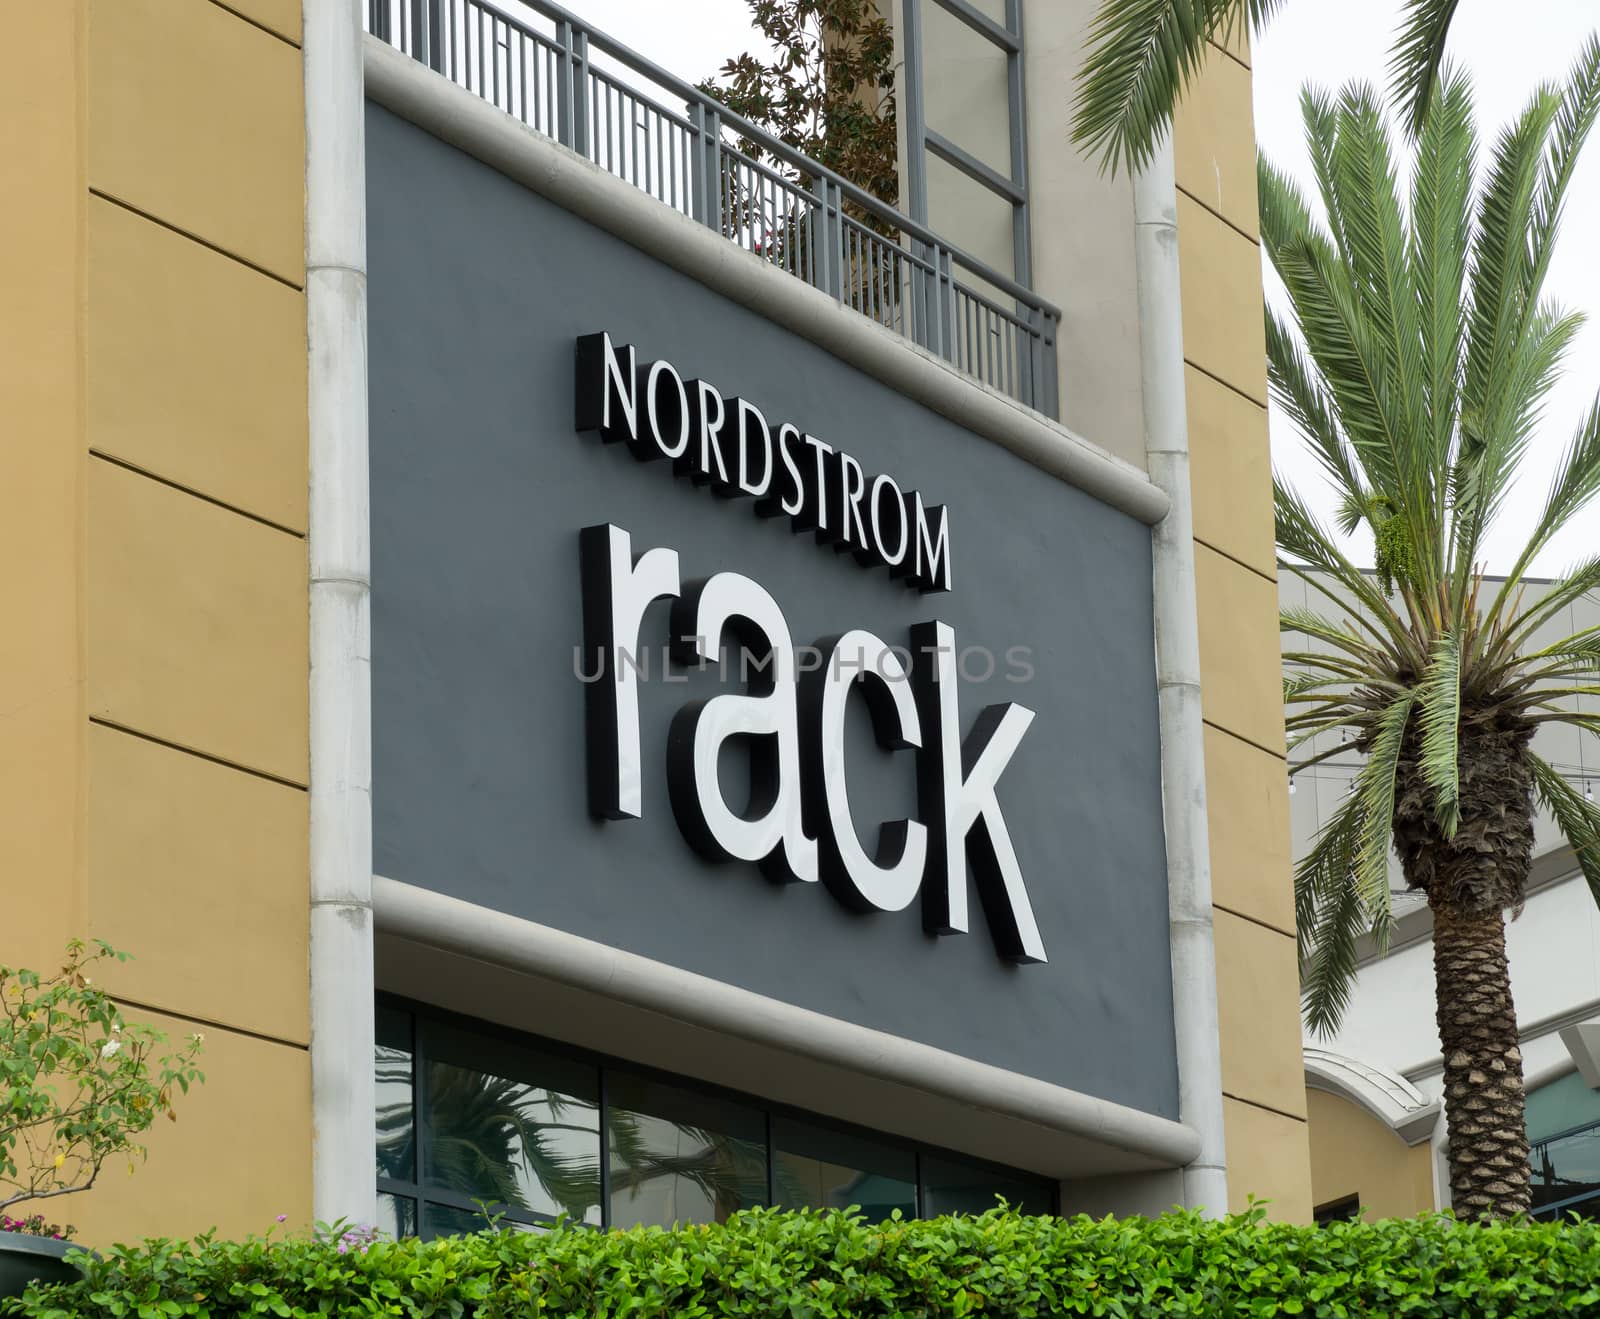 Nordstrom Rack Retail Store Exterior by wolterk